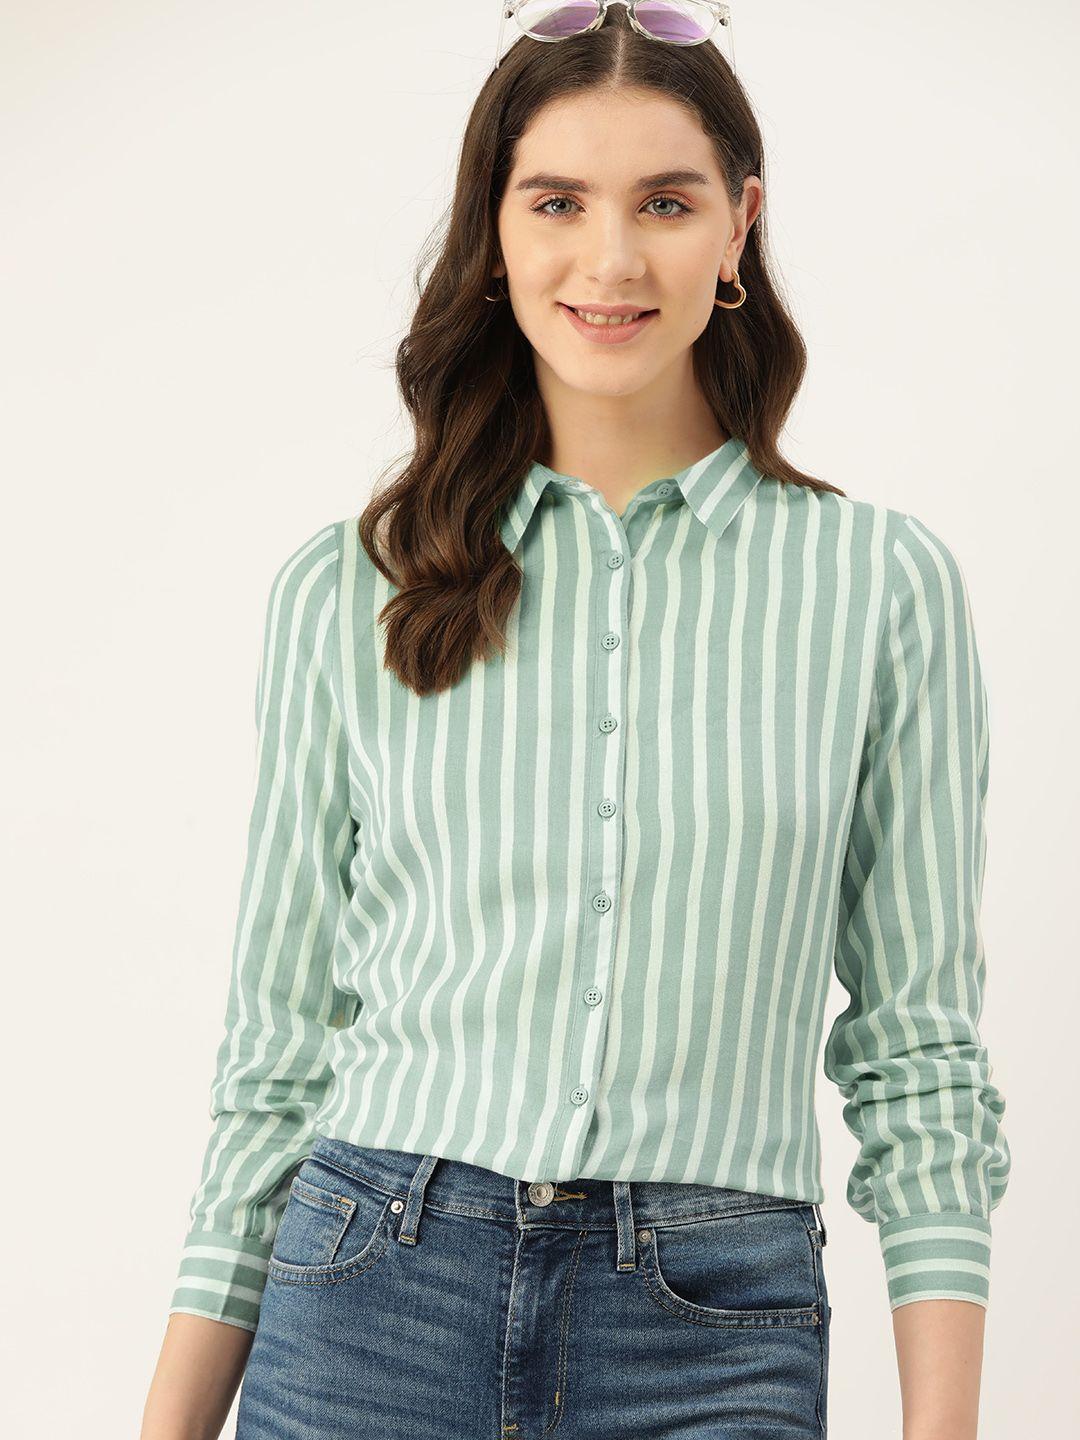 mast & harbour striped casual shirt